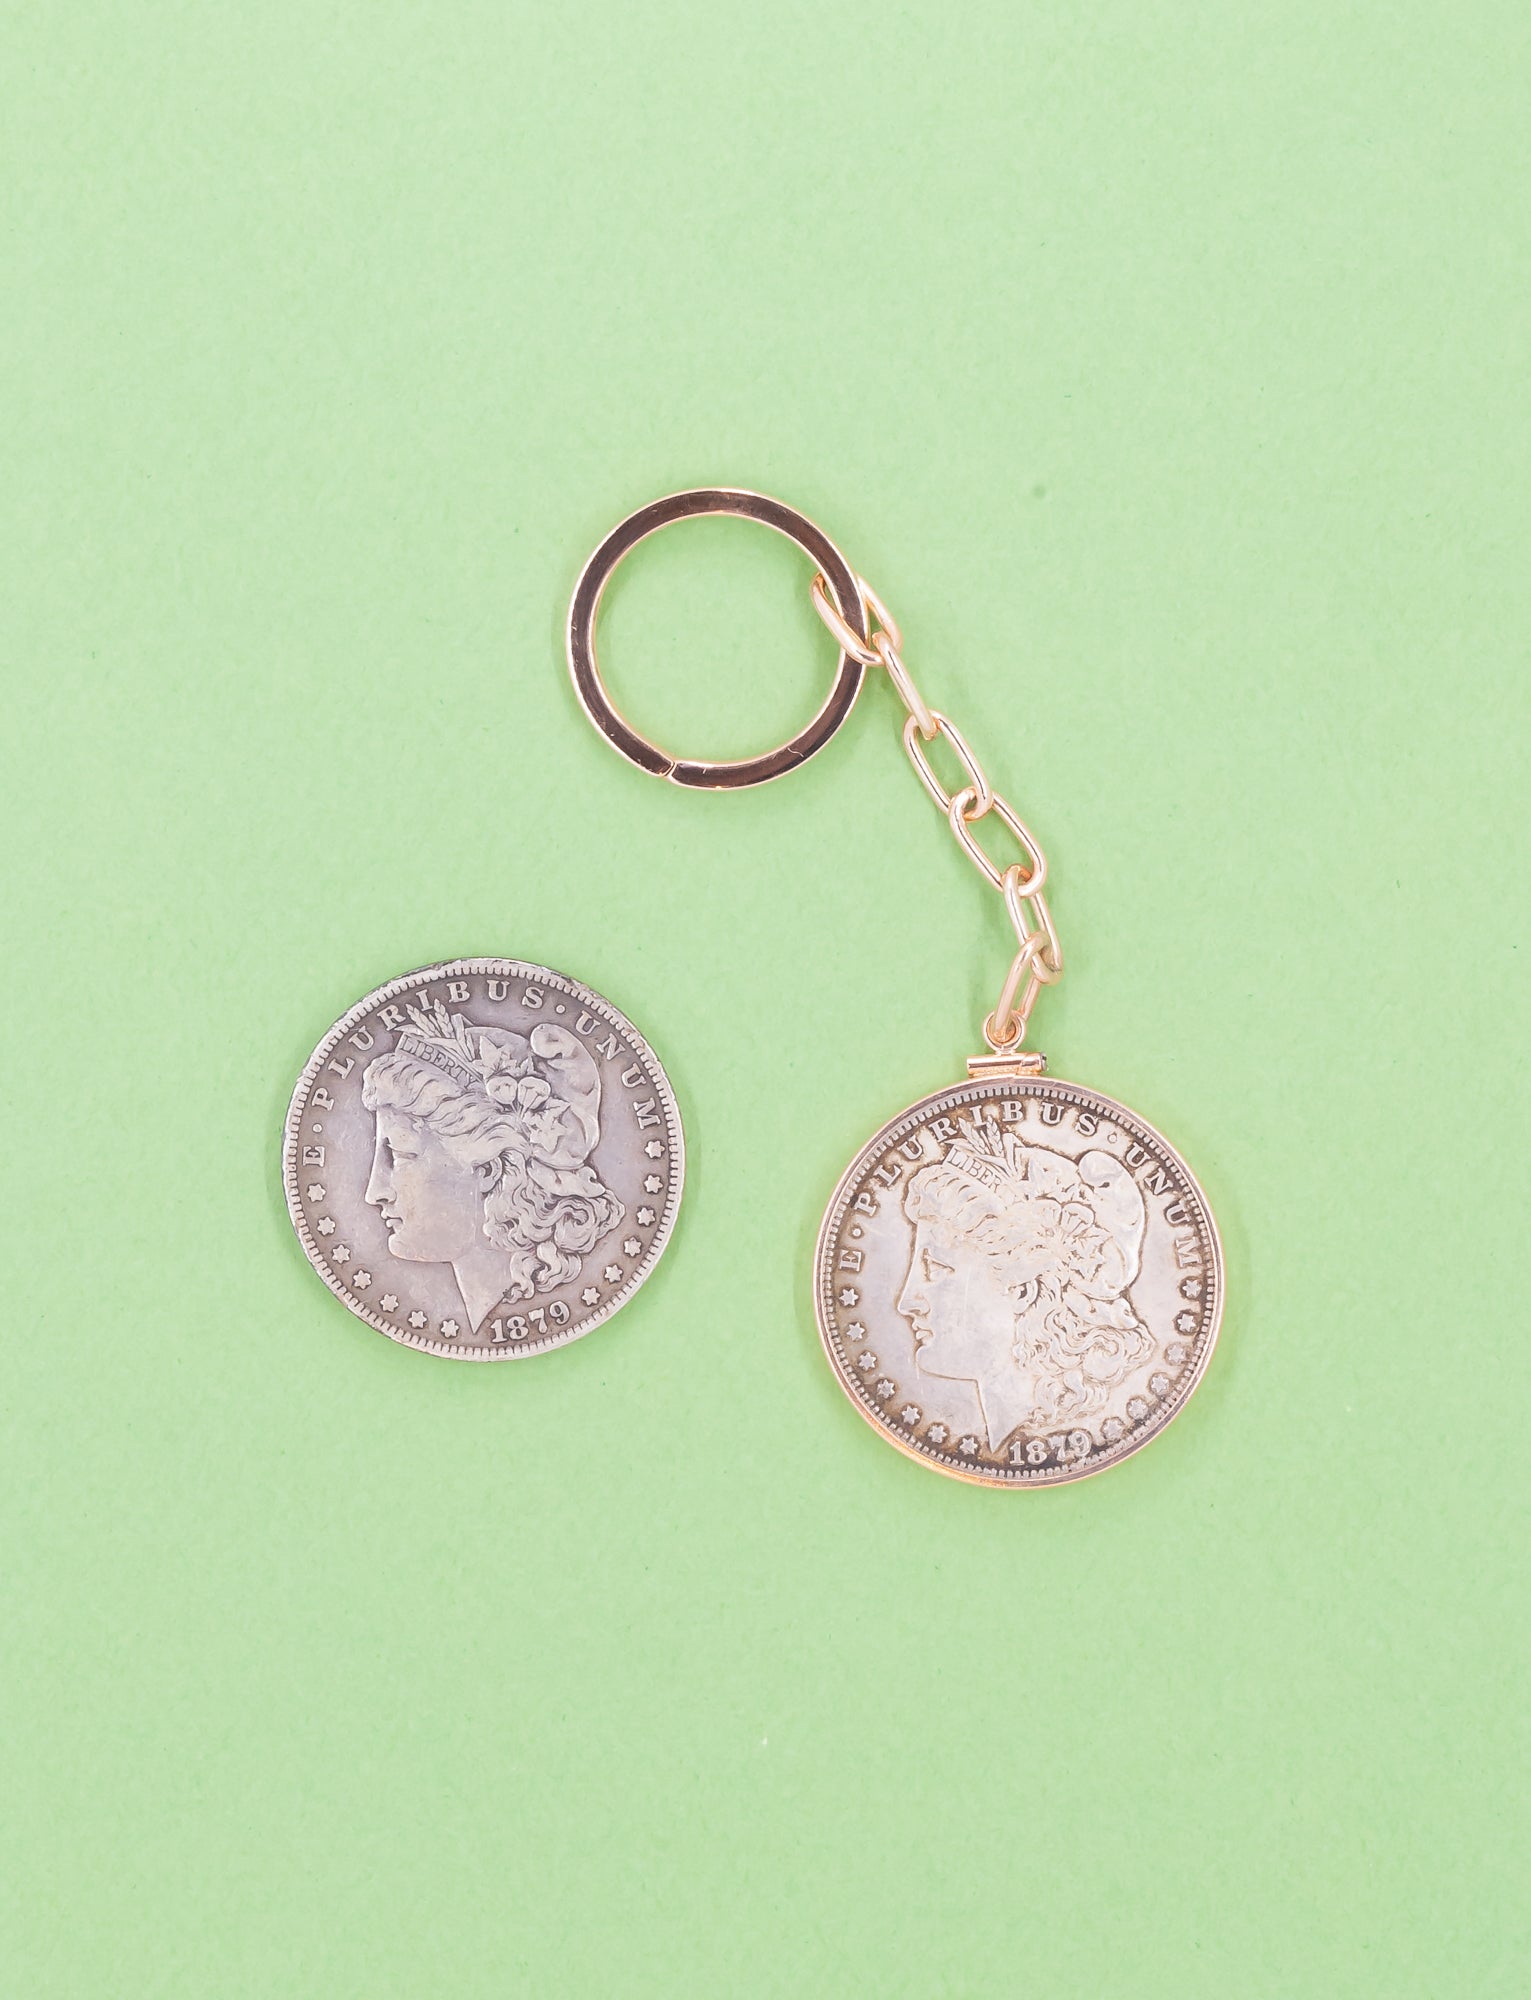 Coin keychain set in 14kt rose gold with a paperclip. 